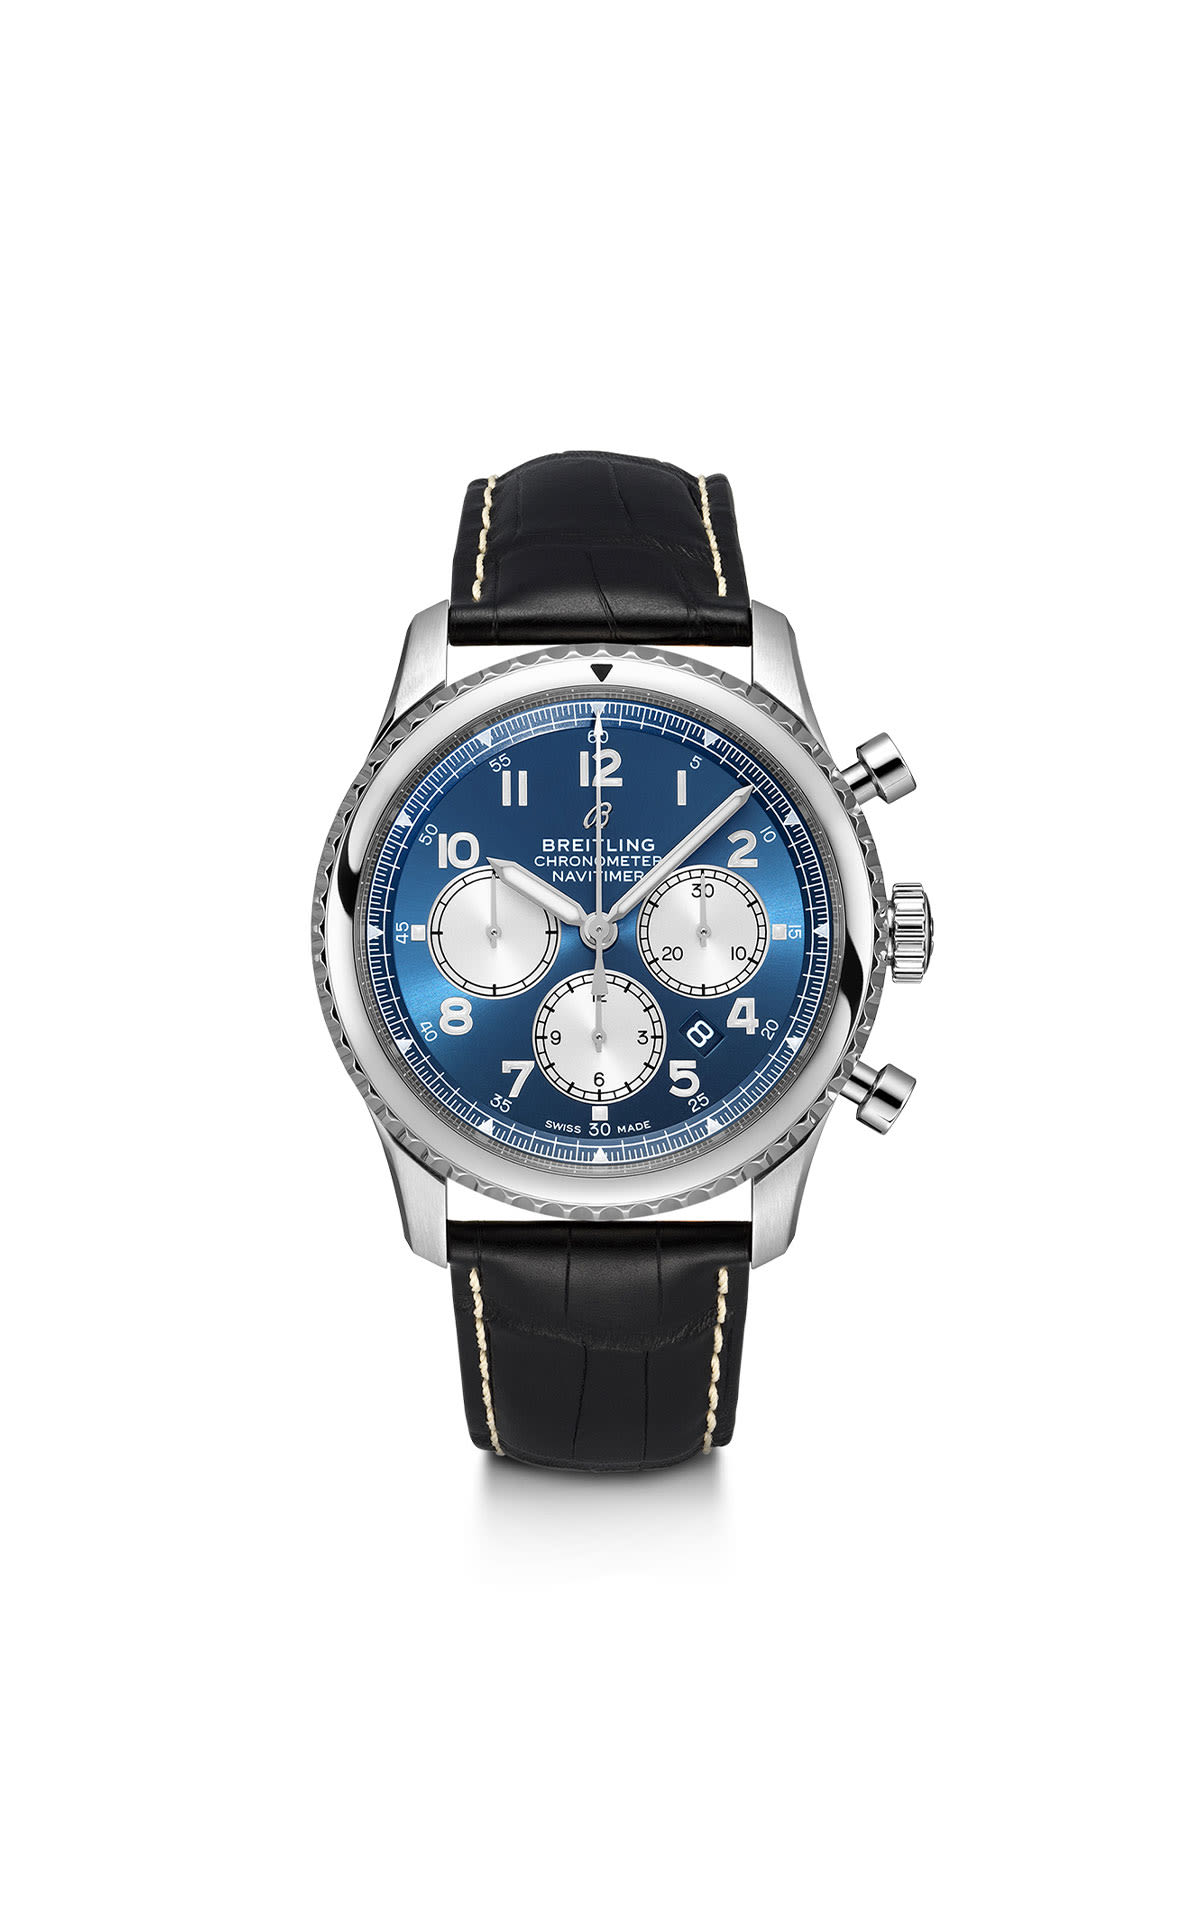 Breitling Navitimer 8 b01 chronograph 43 from Bicester Village